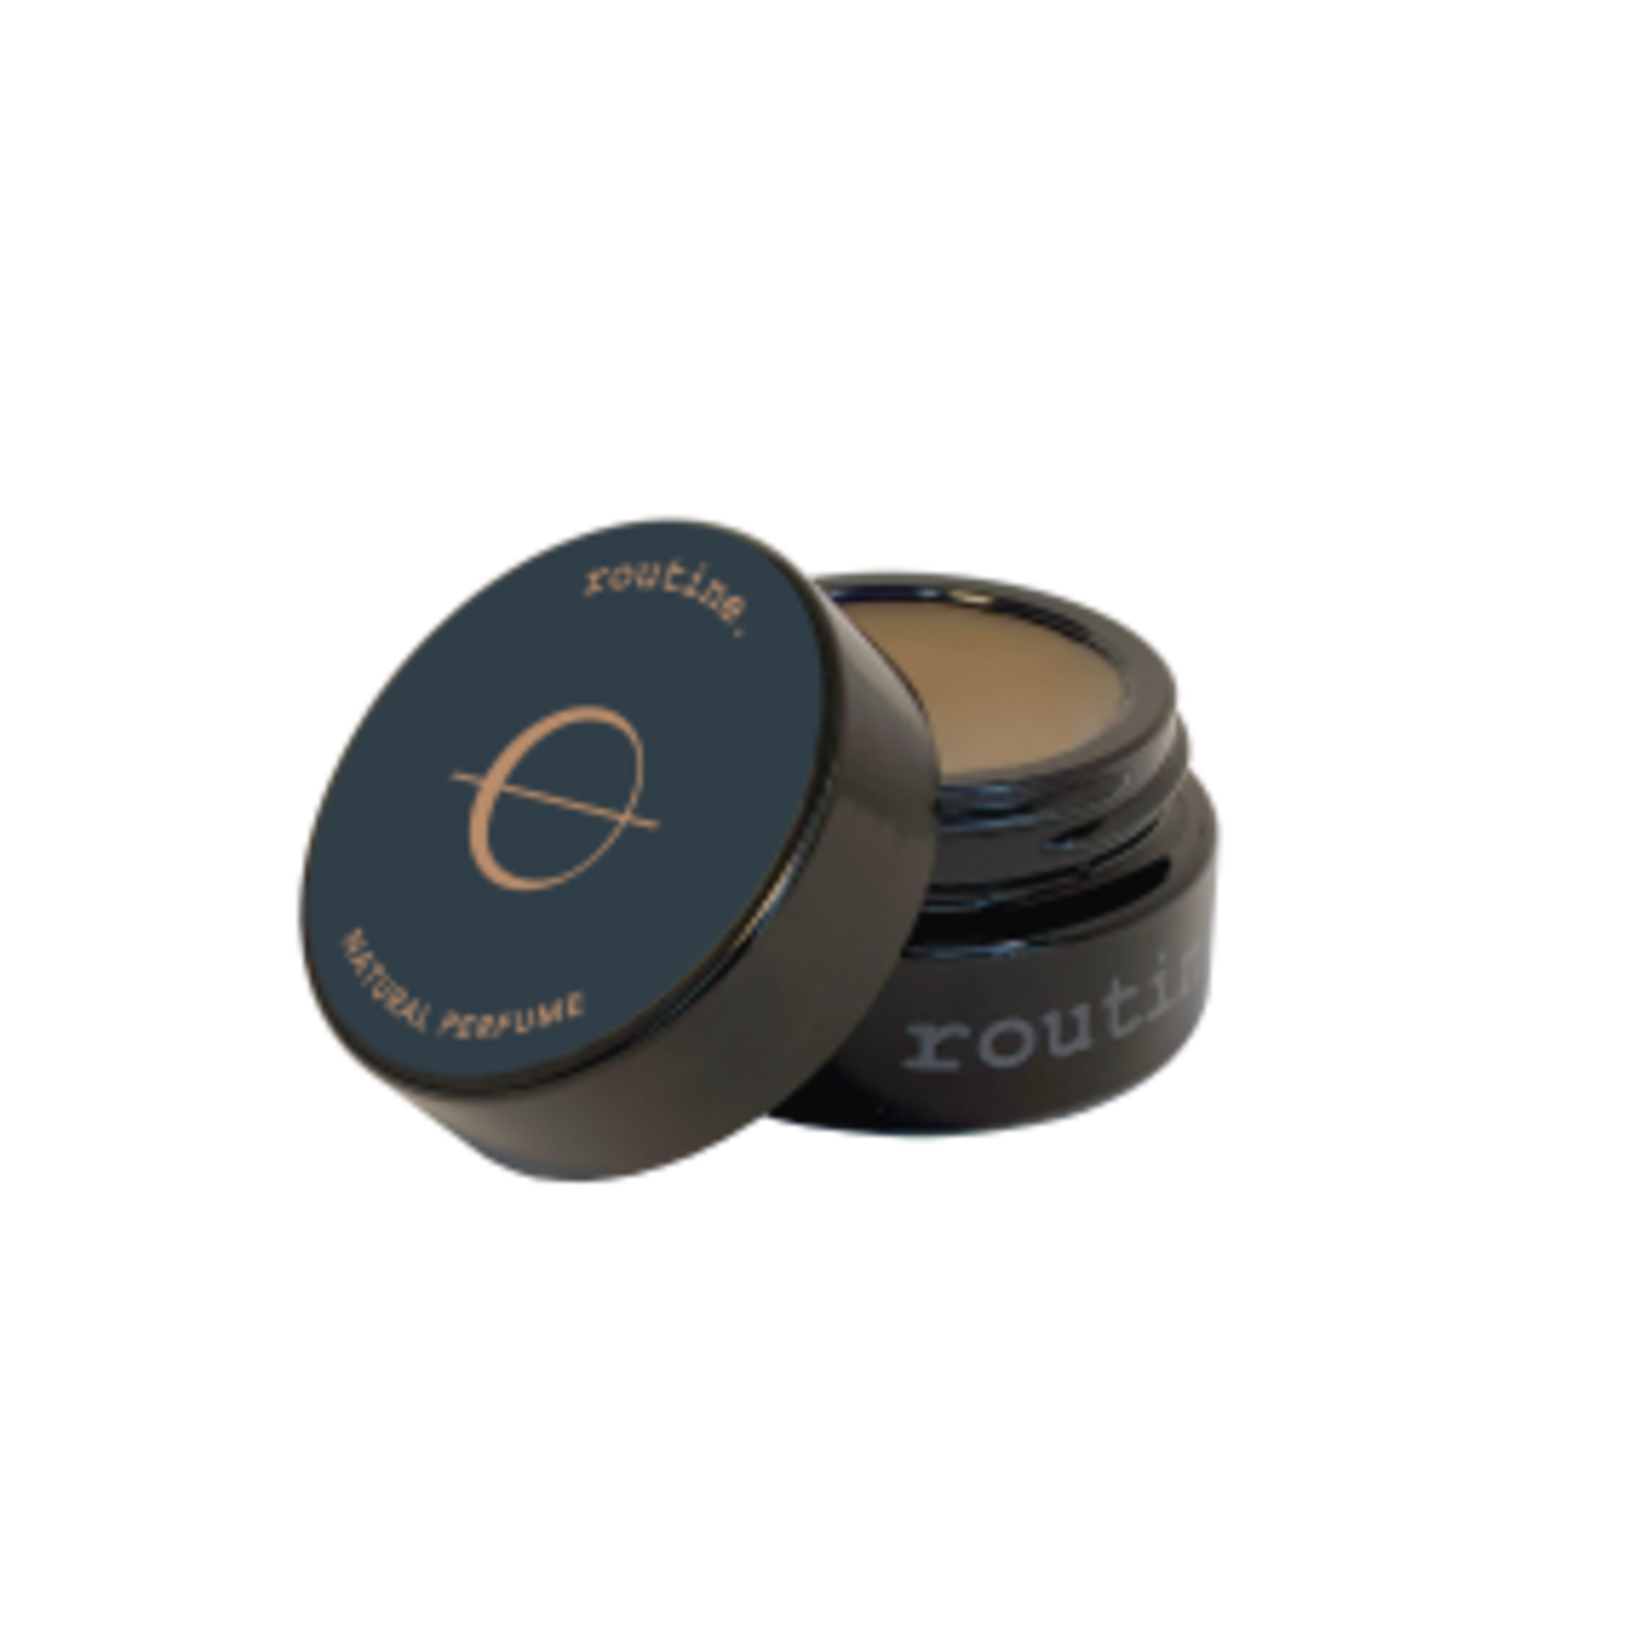 ROUTINE ROUTINE THE CLASS - NATURAL SOLID PERFUME 15G